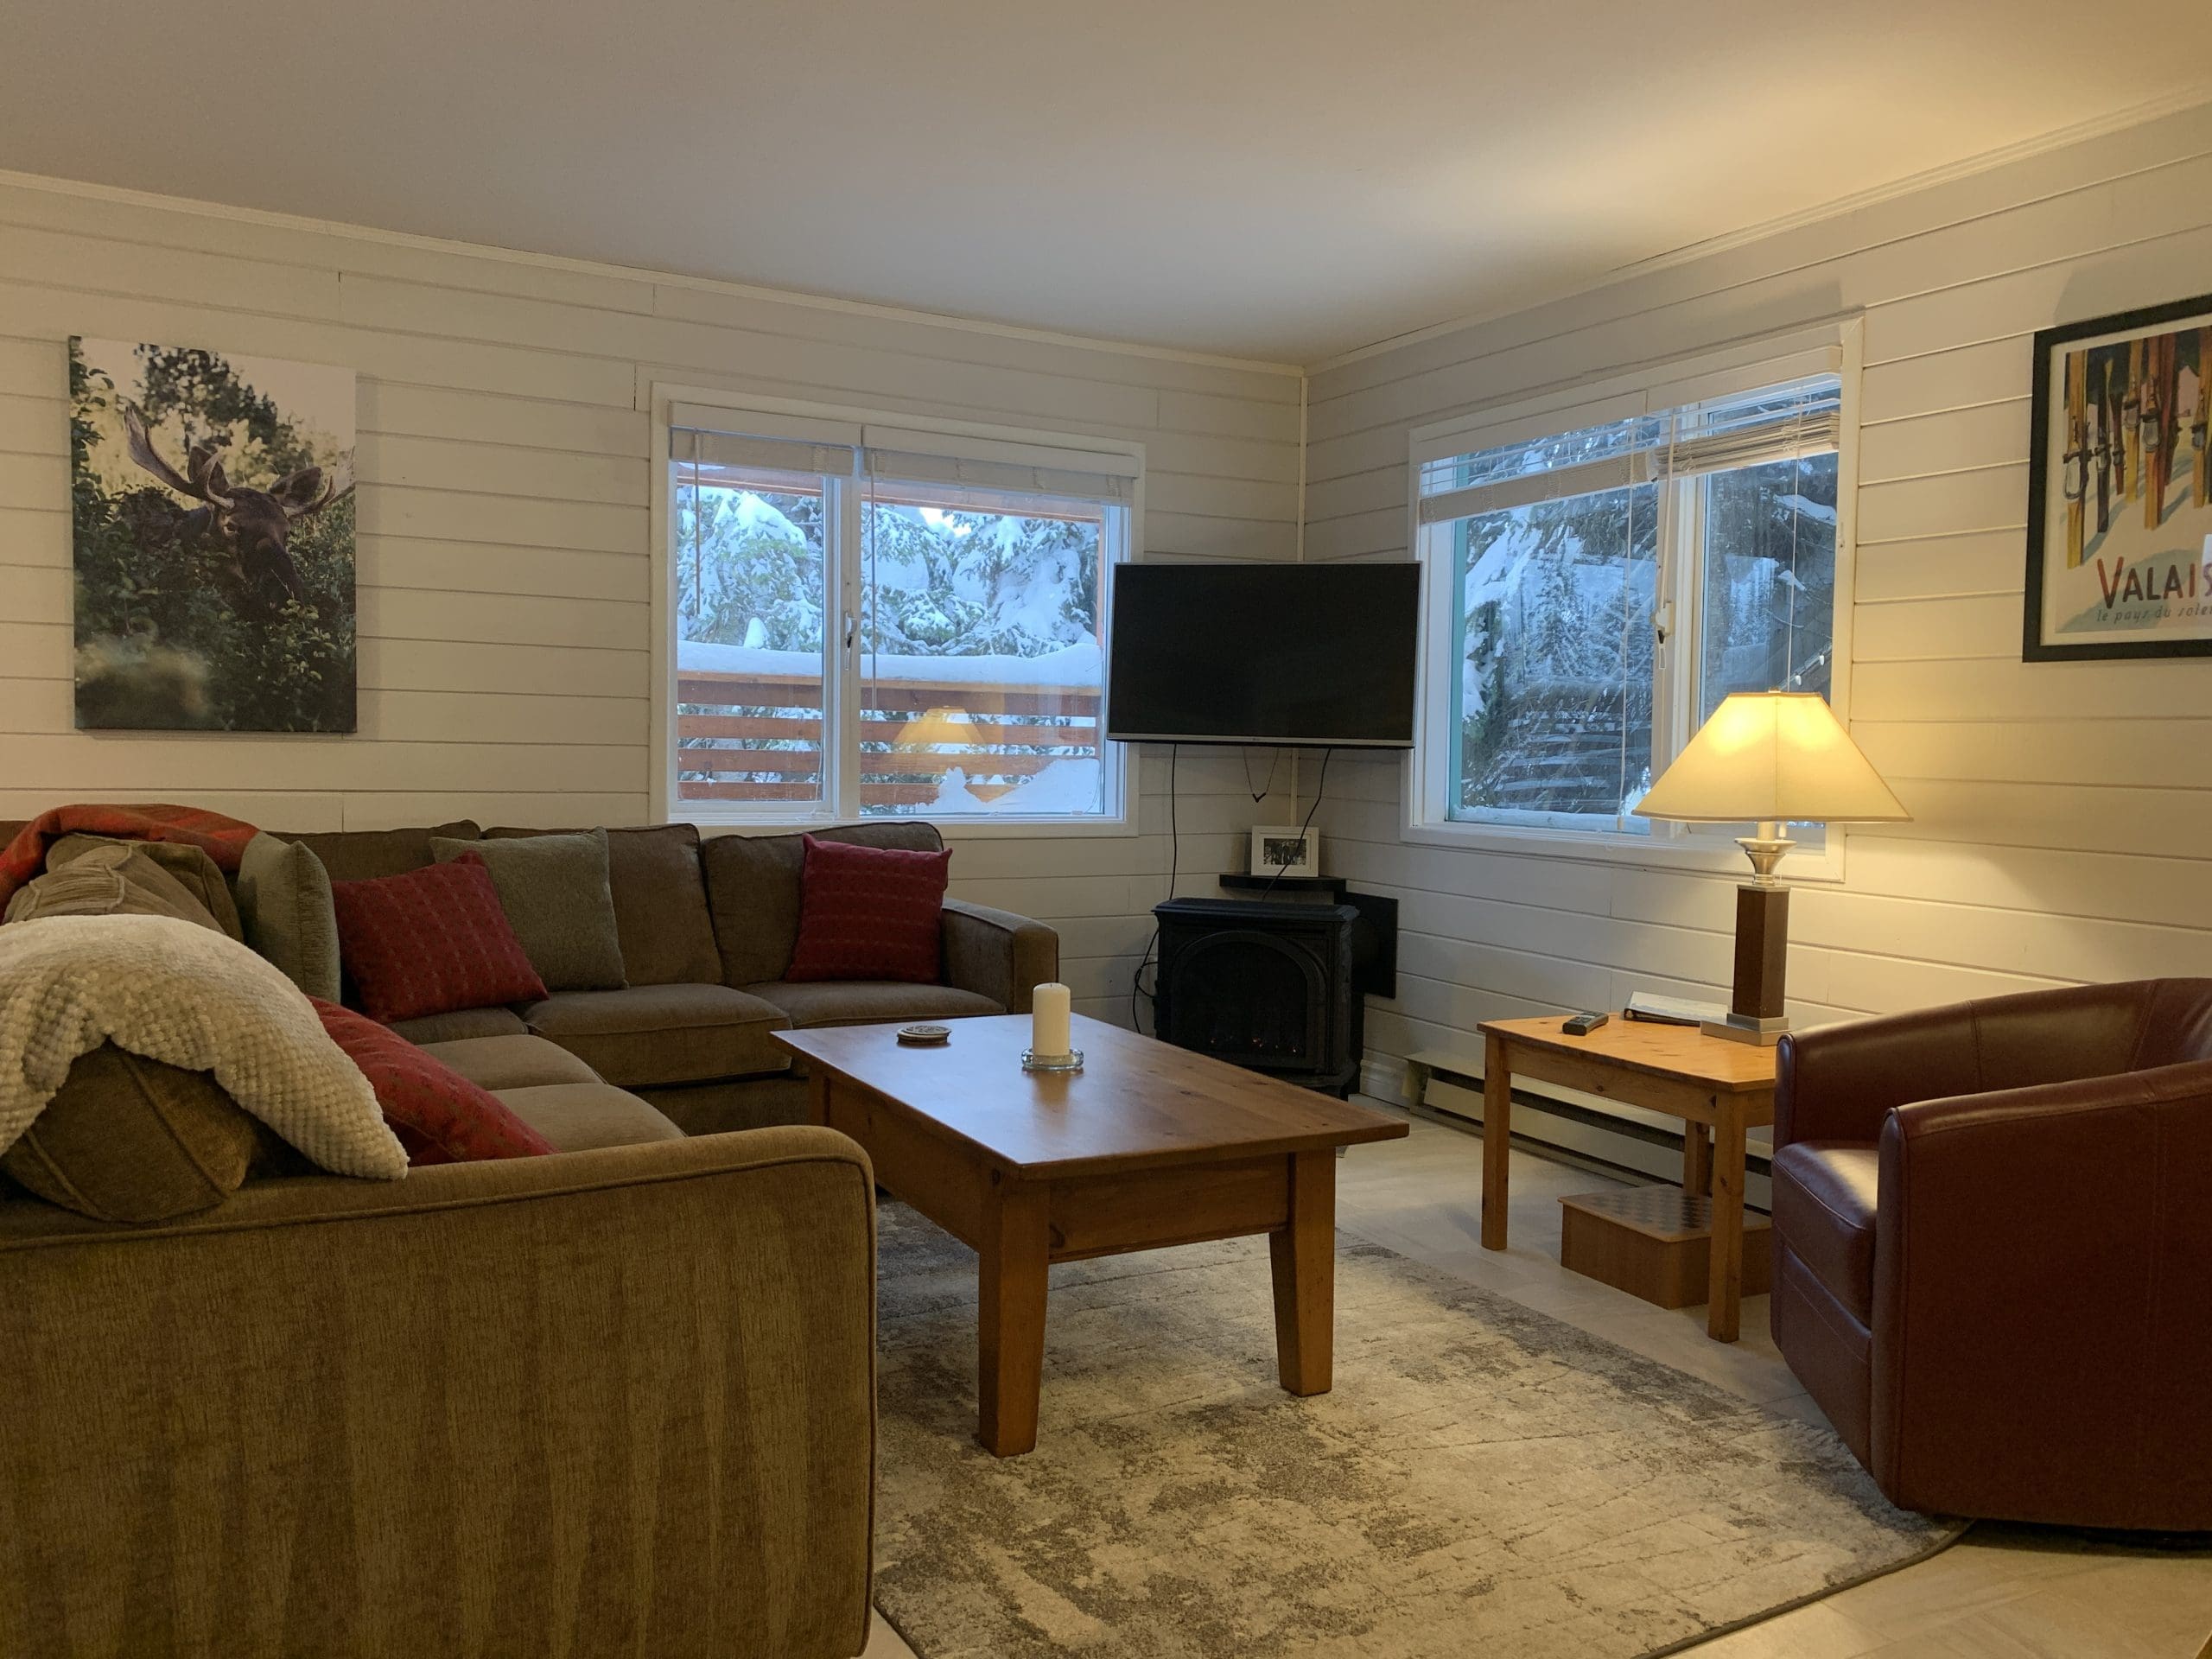 Bright ground level suite living room with views of the Alpine Meadows chairlift. Private hot tub, laundry, and exceptional ski in and out right from the back of the home to the lifts. Less than a 5 minute walk to the village too.